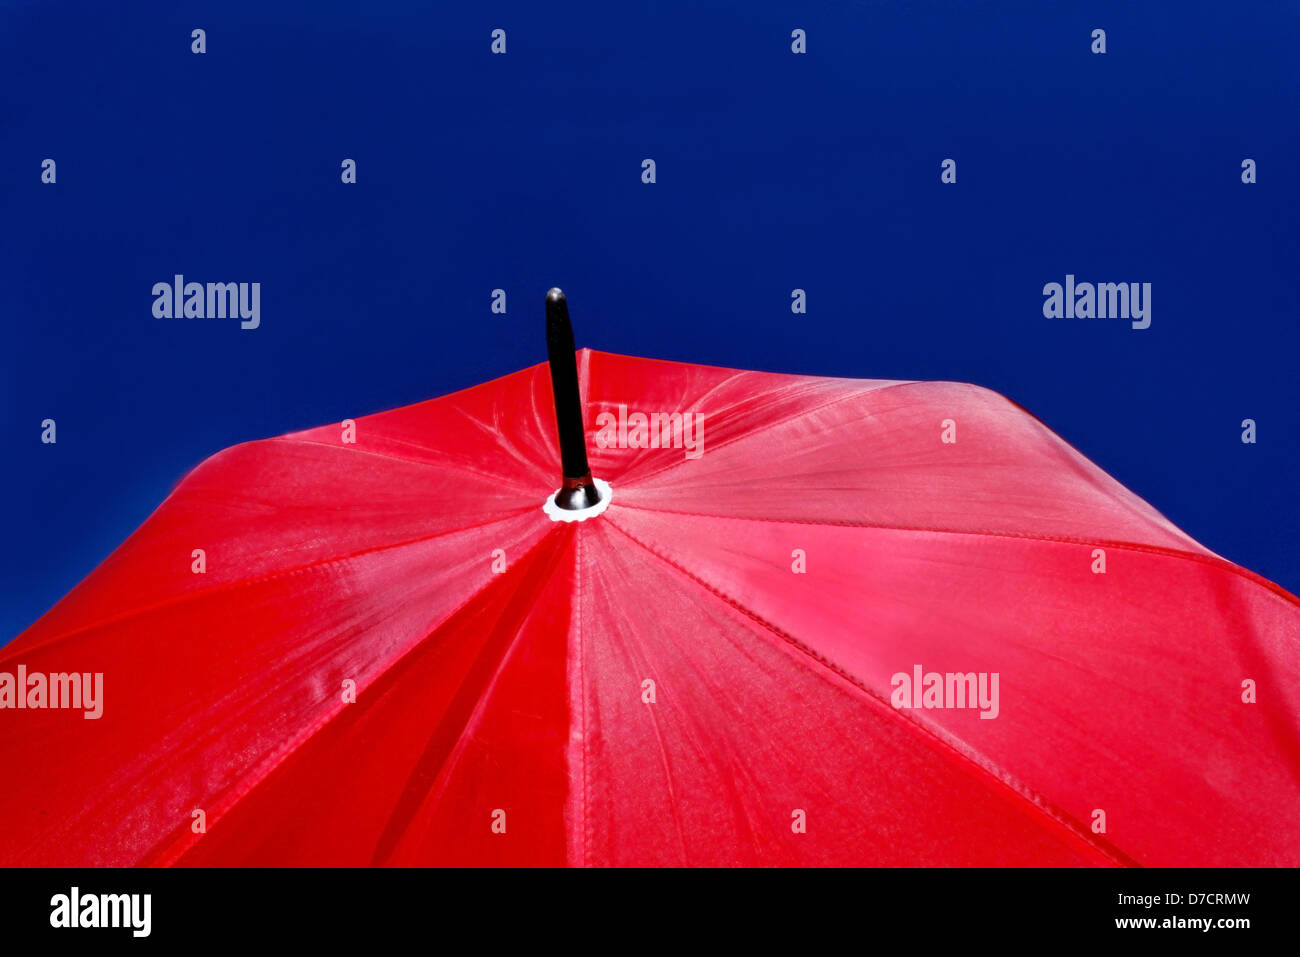 Large size red umbrella isolated in clear dark blue sky. Stock Photo